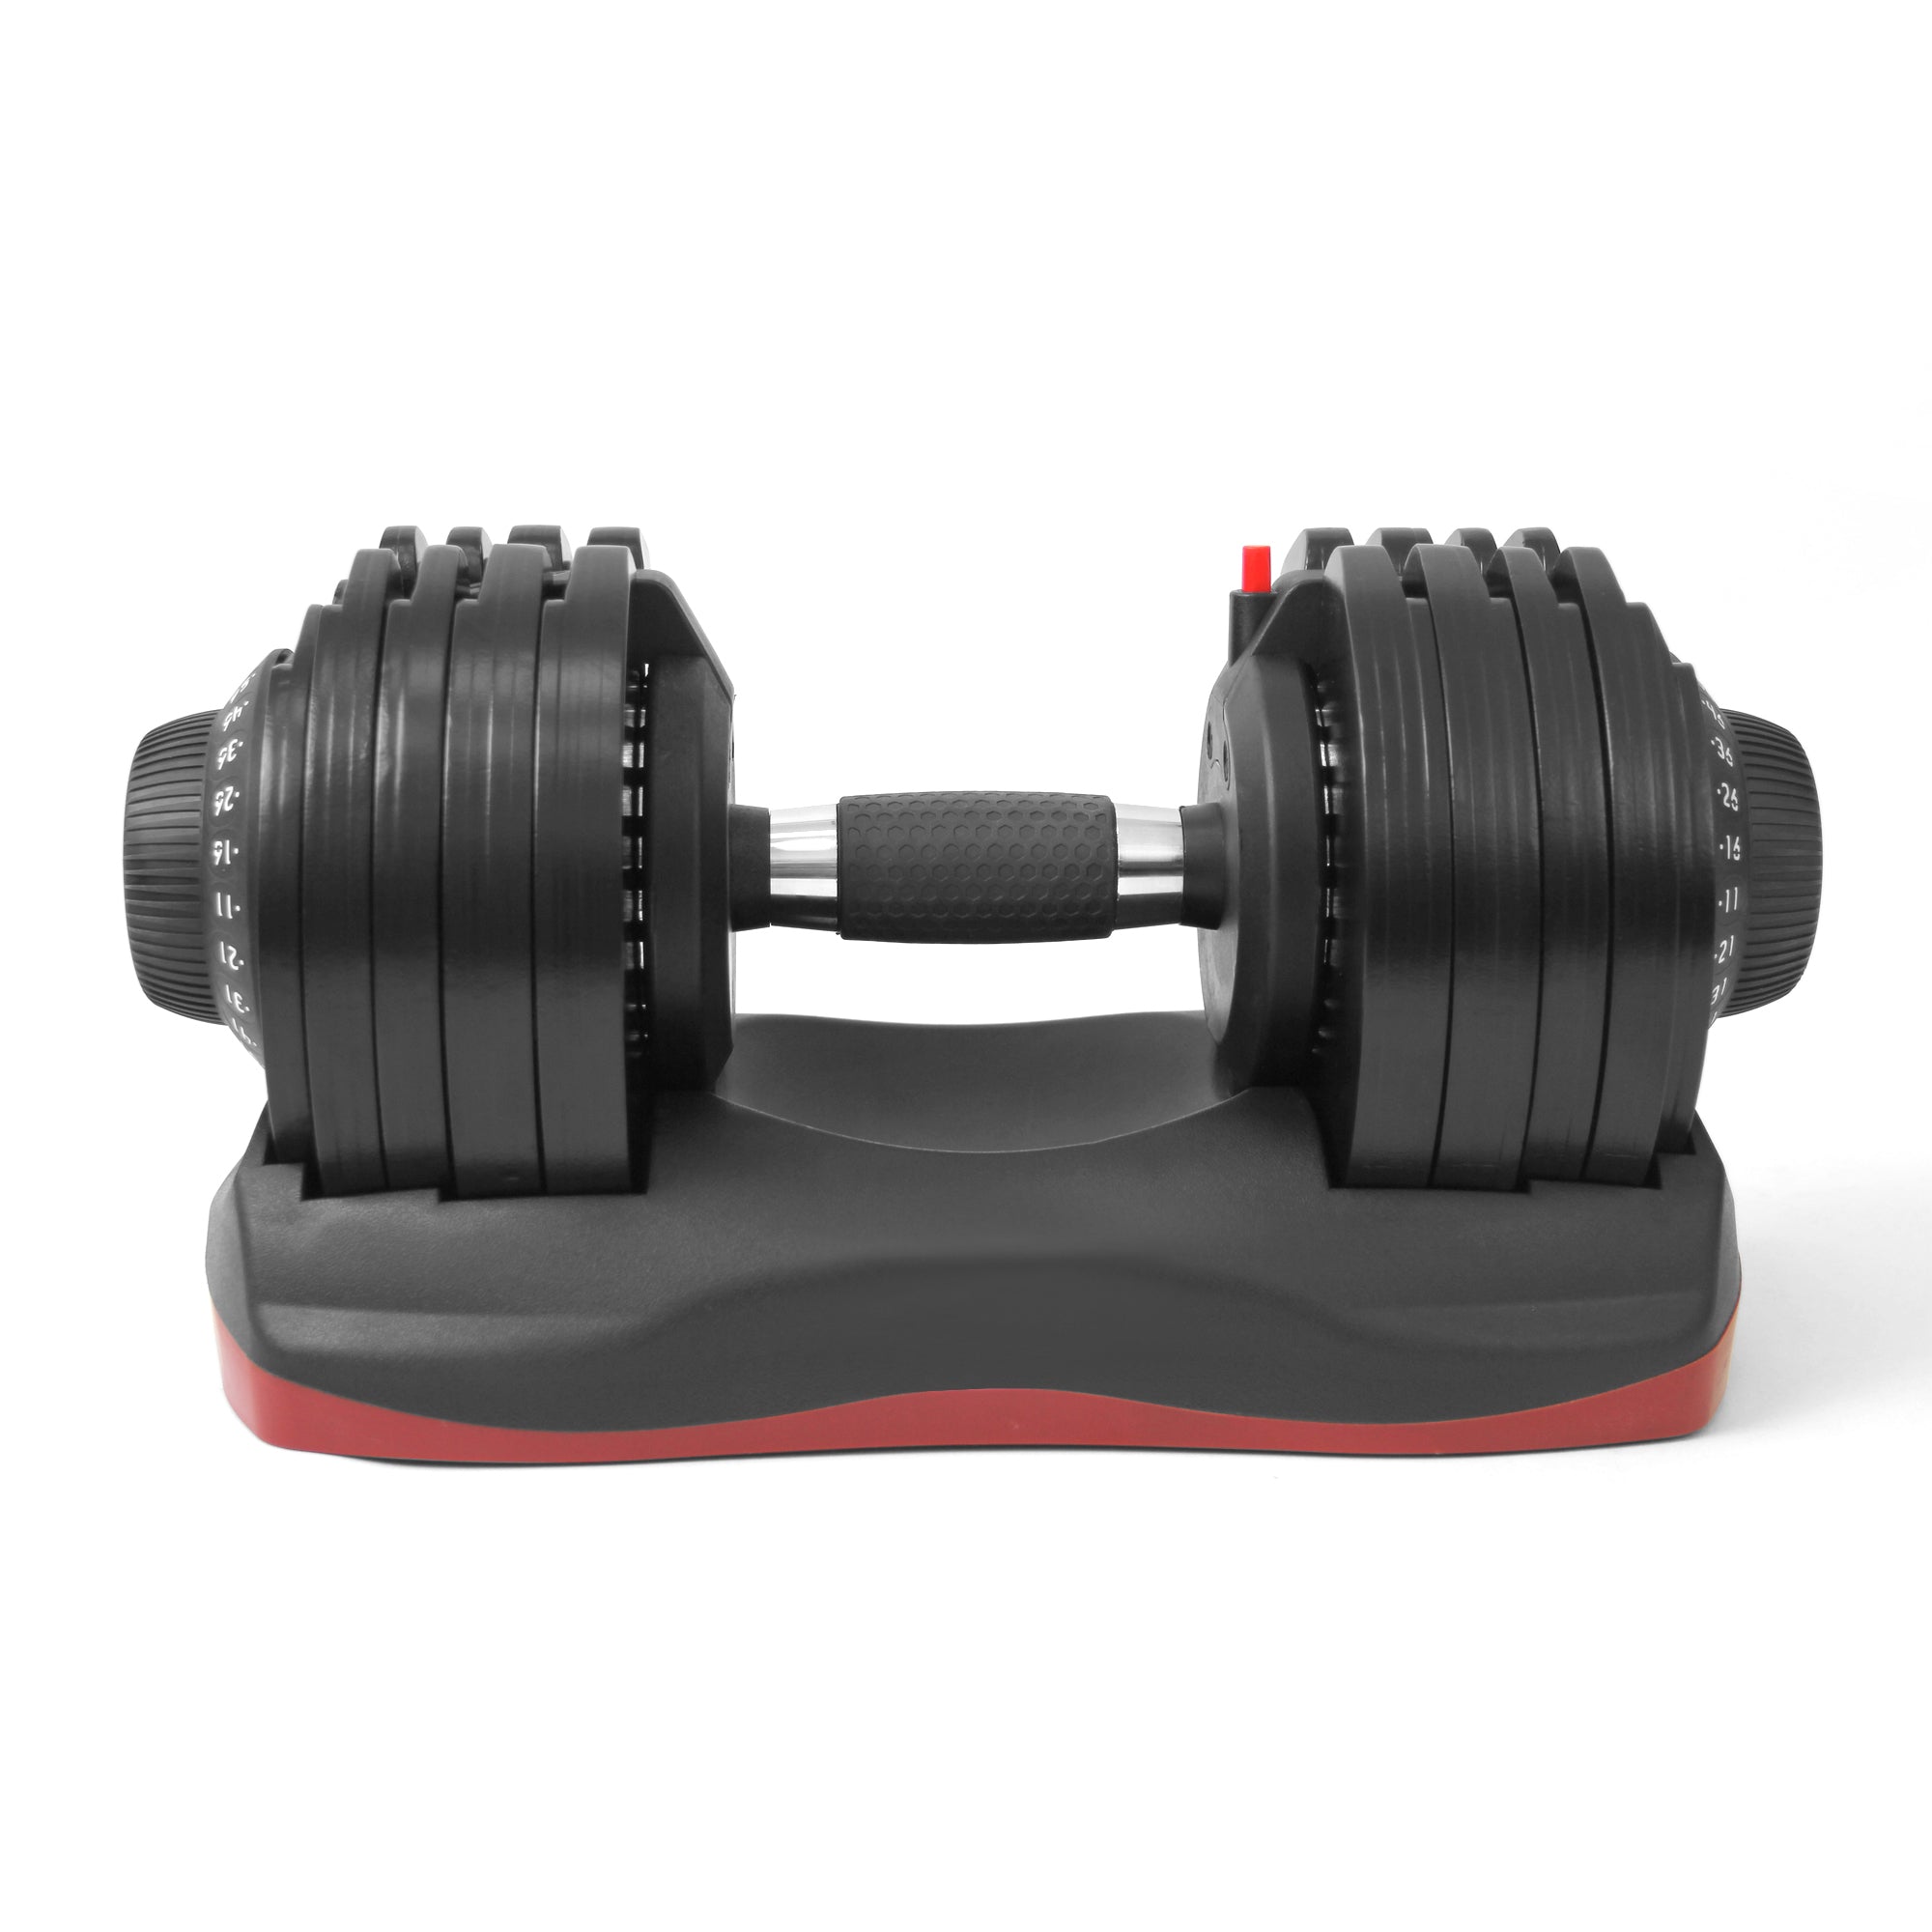 Adjustable Dumbbell DT1166 66 lbs